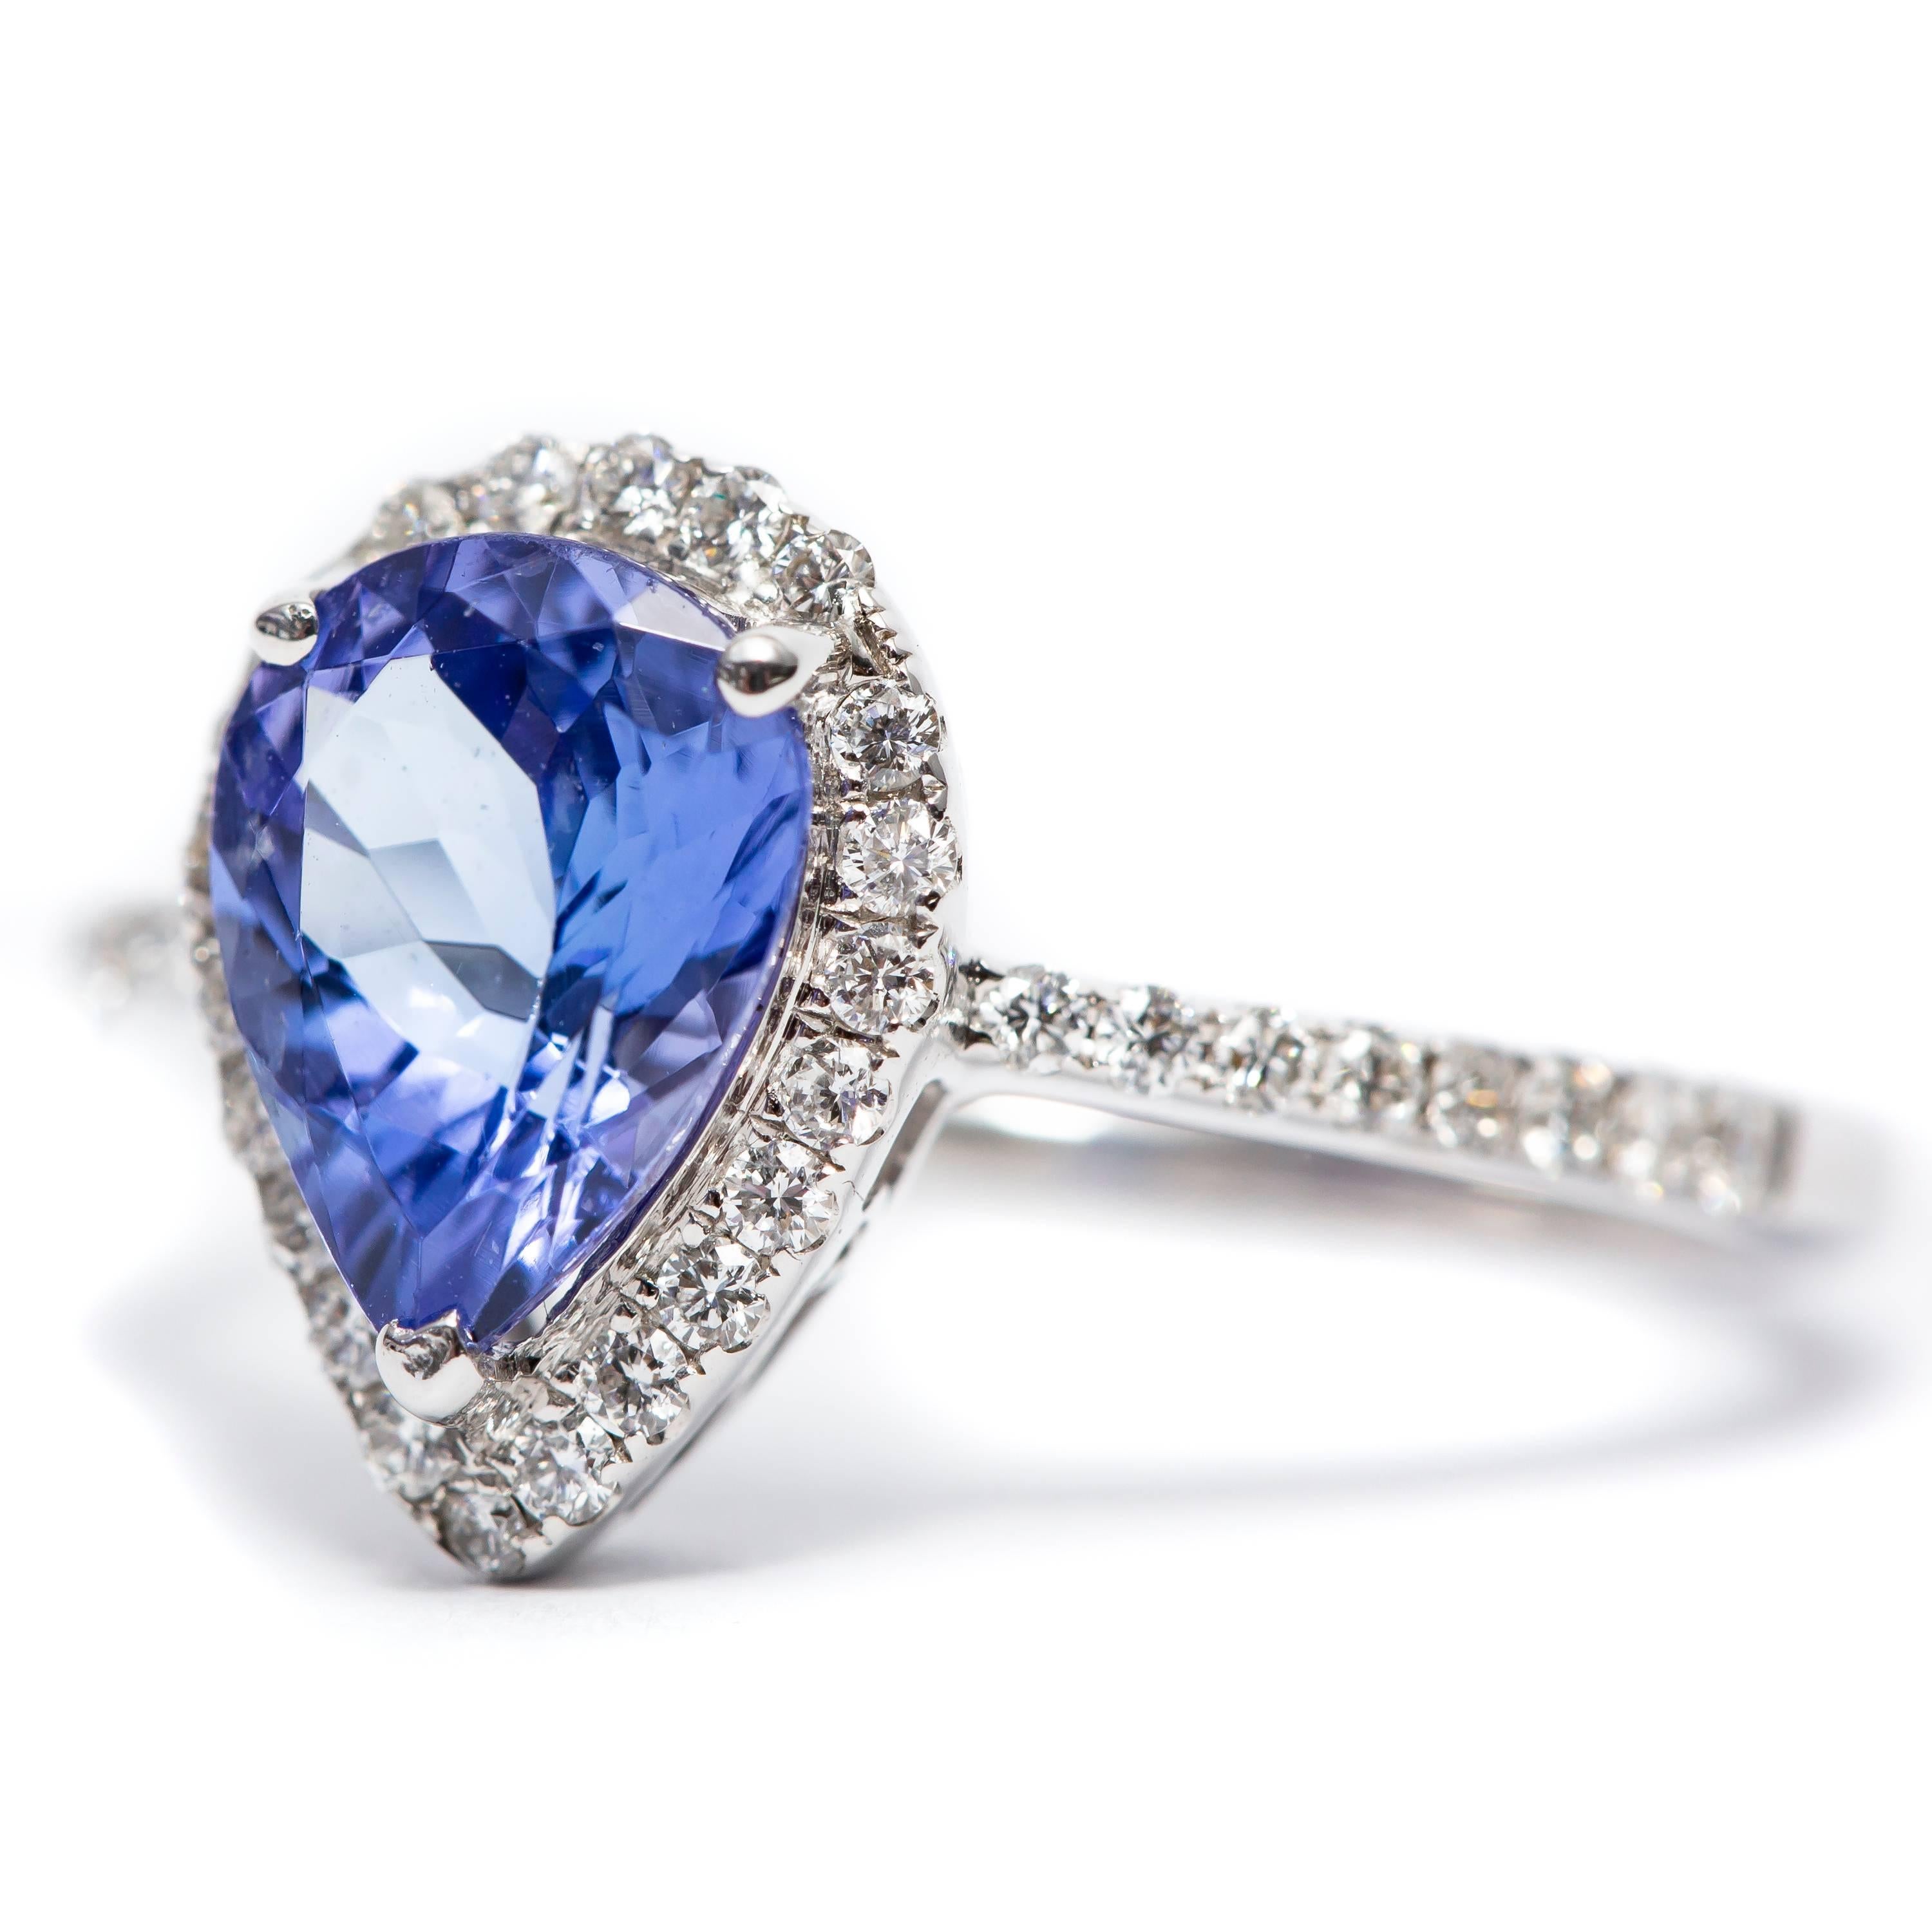 A beautiful 1.58 Carat pear shaped tanzanite engagement ring featuring 0.41 Carat of white Color G Clarity VS1 Round Brilliant Diamonds. Set in 18 Karat White Gold. 
UK size - O, USA size - 7 1/2 available in other carat sizes as well as ring sizes.